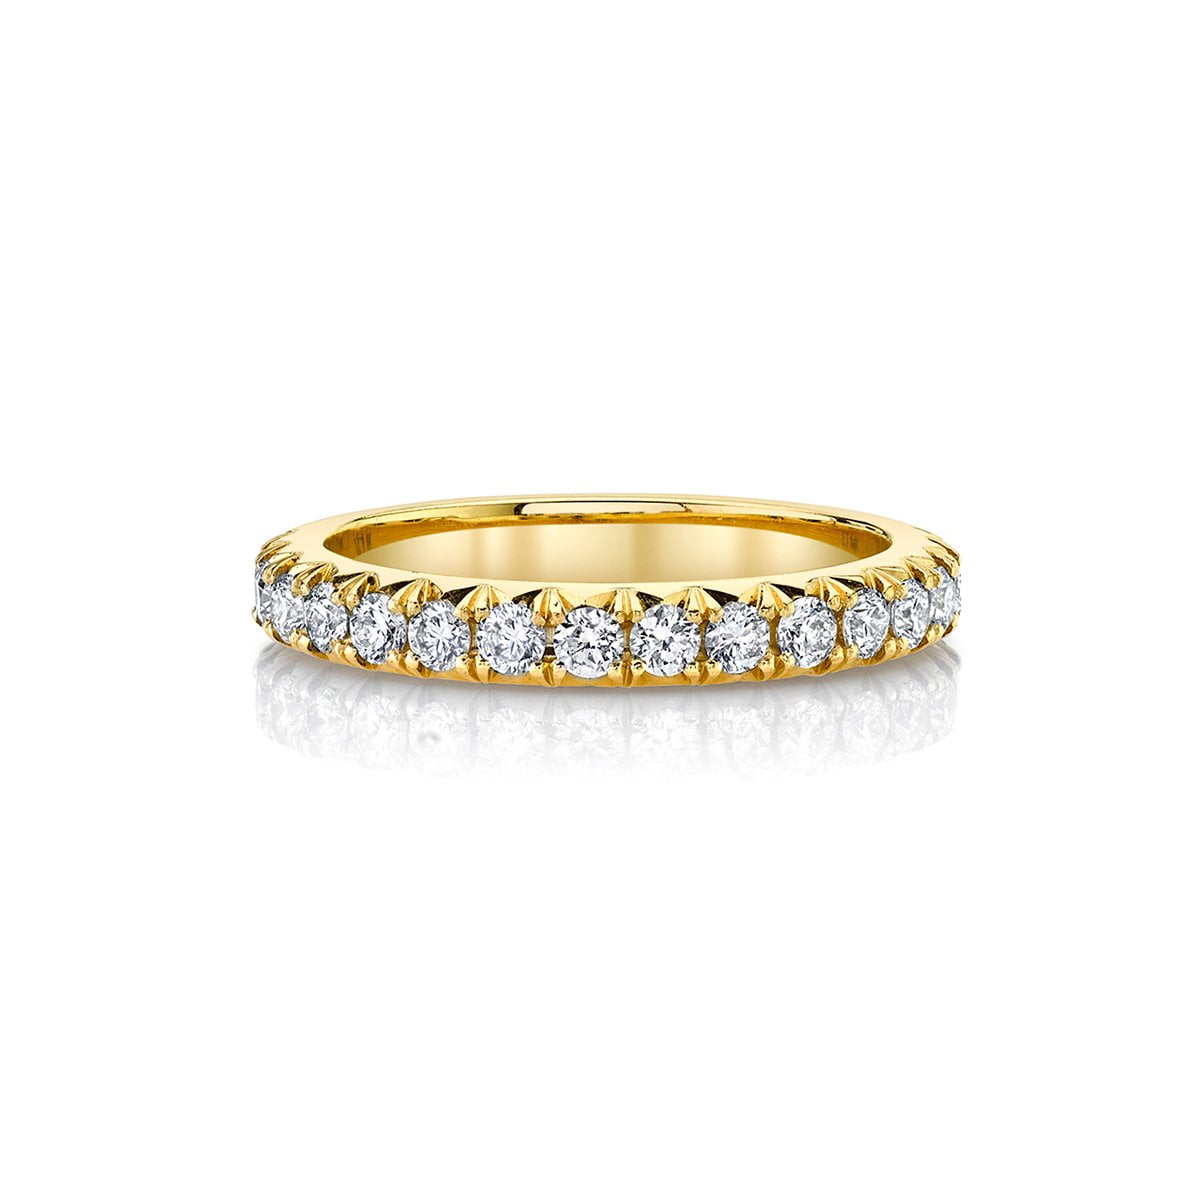 French Pavé Eternity Band